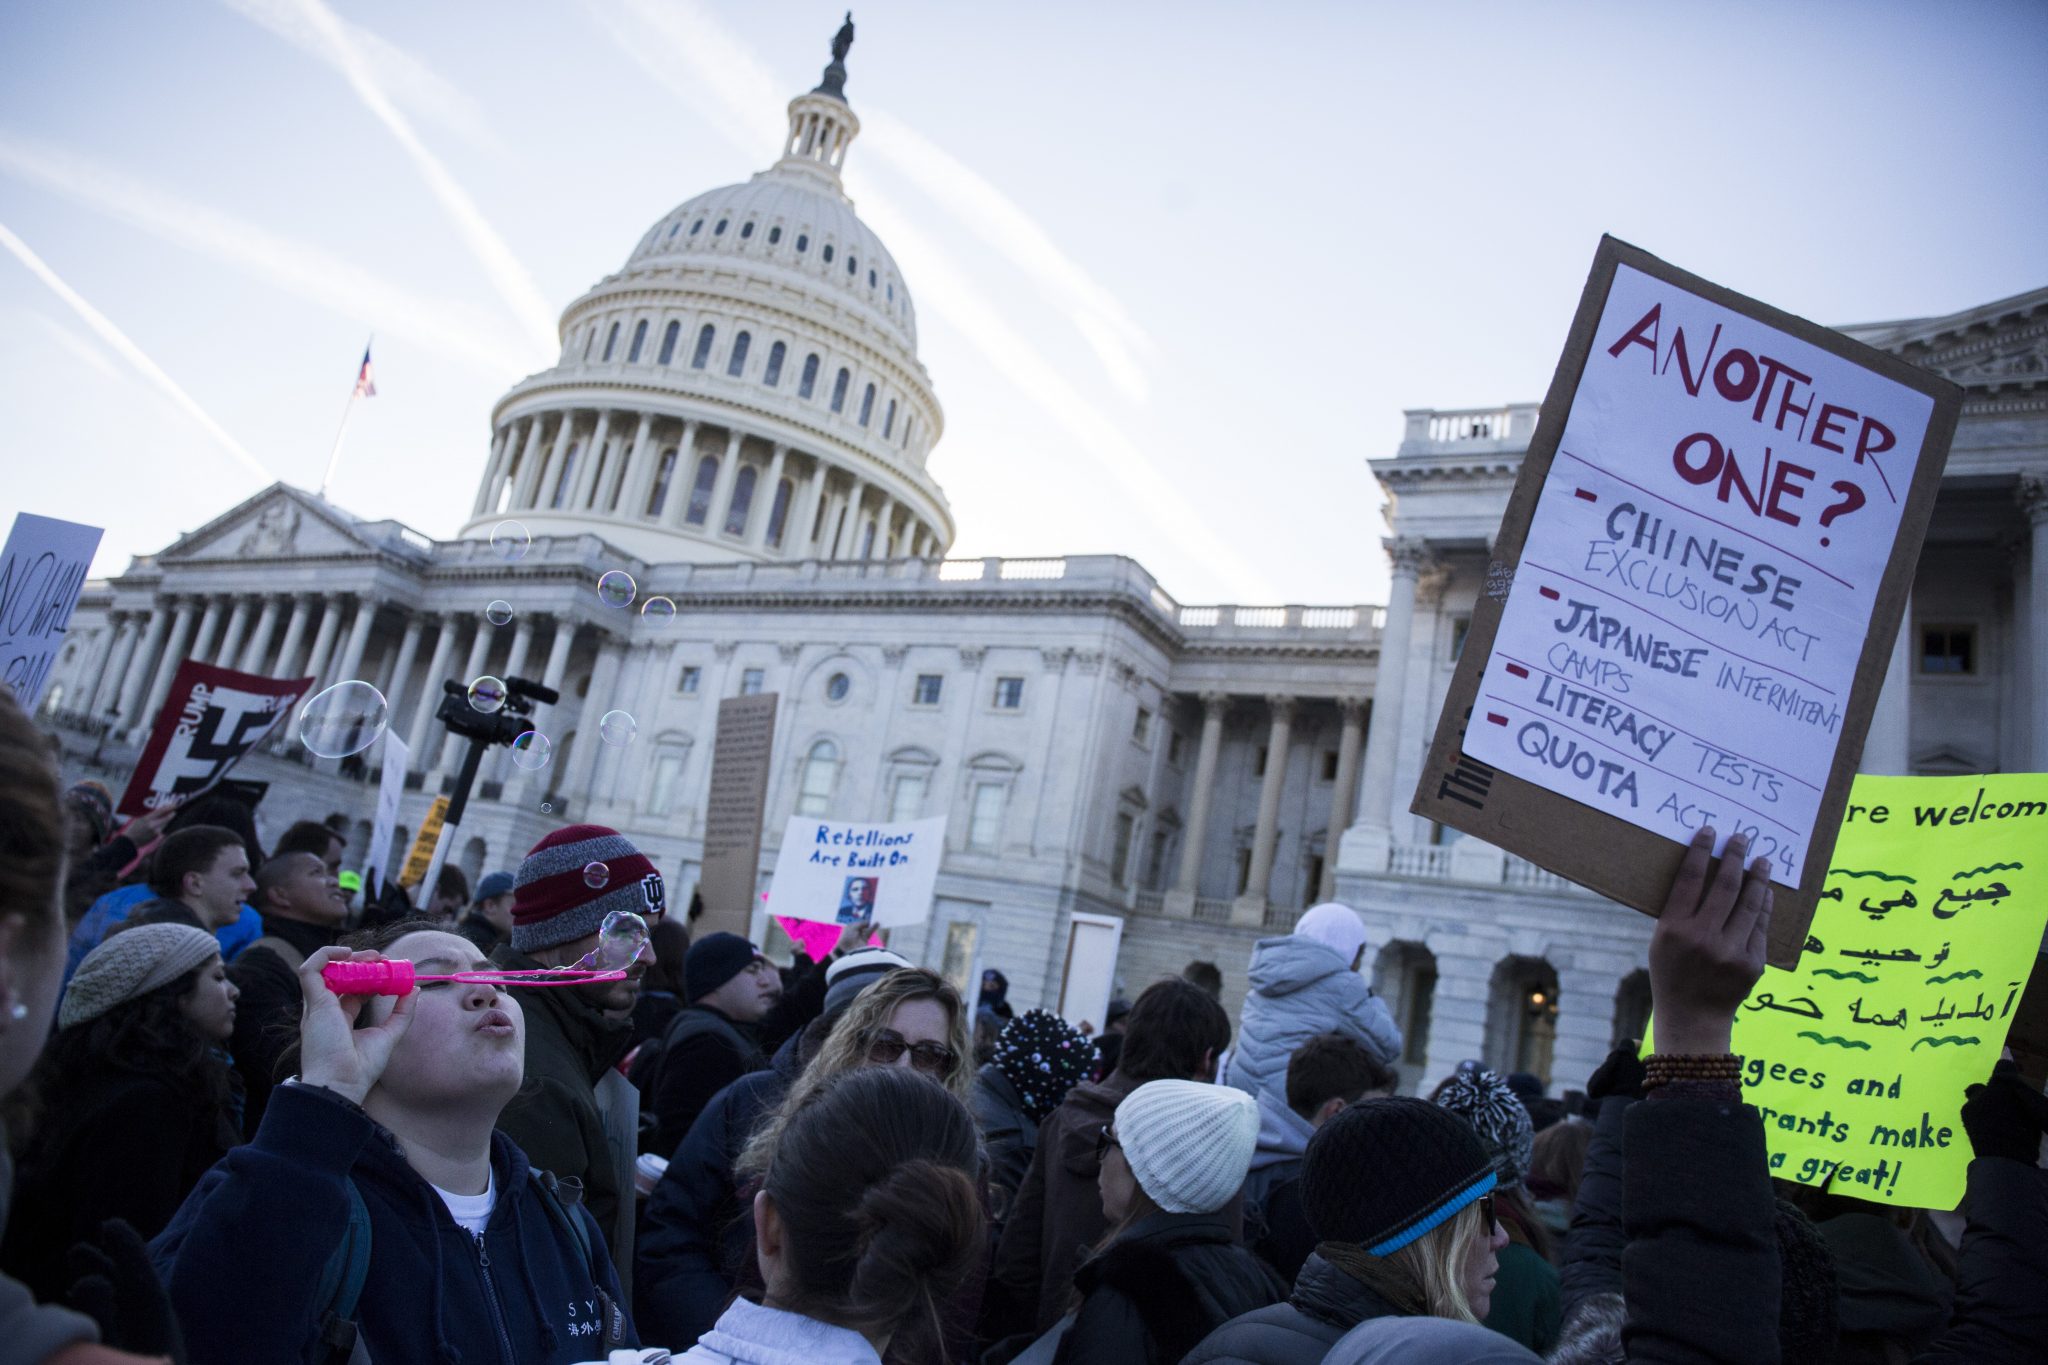 WASHINGTON, DC - FEBRUARY 04: Demonstrators gather in front of the Capitol Building on February 4, 2017 in Washington, DC. The demonstration was aimed at President Donald Trump's travel ban policy.   Zach Gibson/Getty Images/AFP